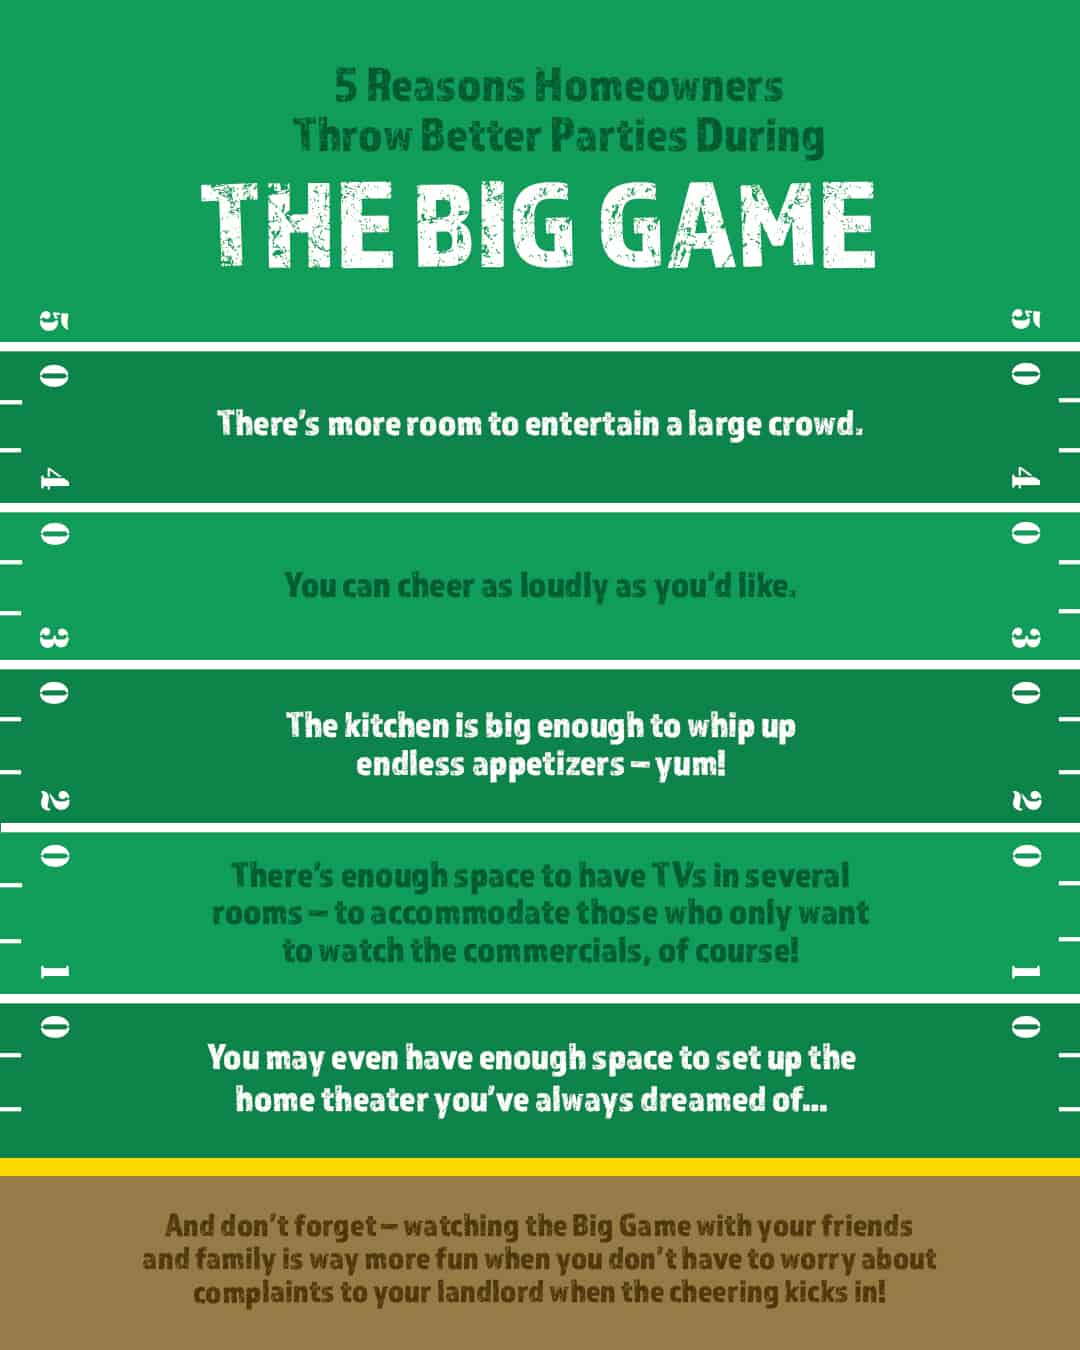 5 Reasons Homeowners Throw Better Parties During the Big Game [INFOGRAPHIC] | Simplifying The Market